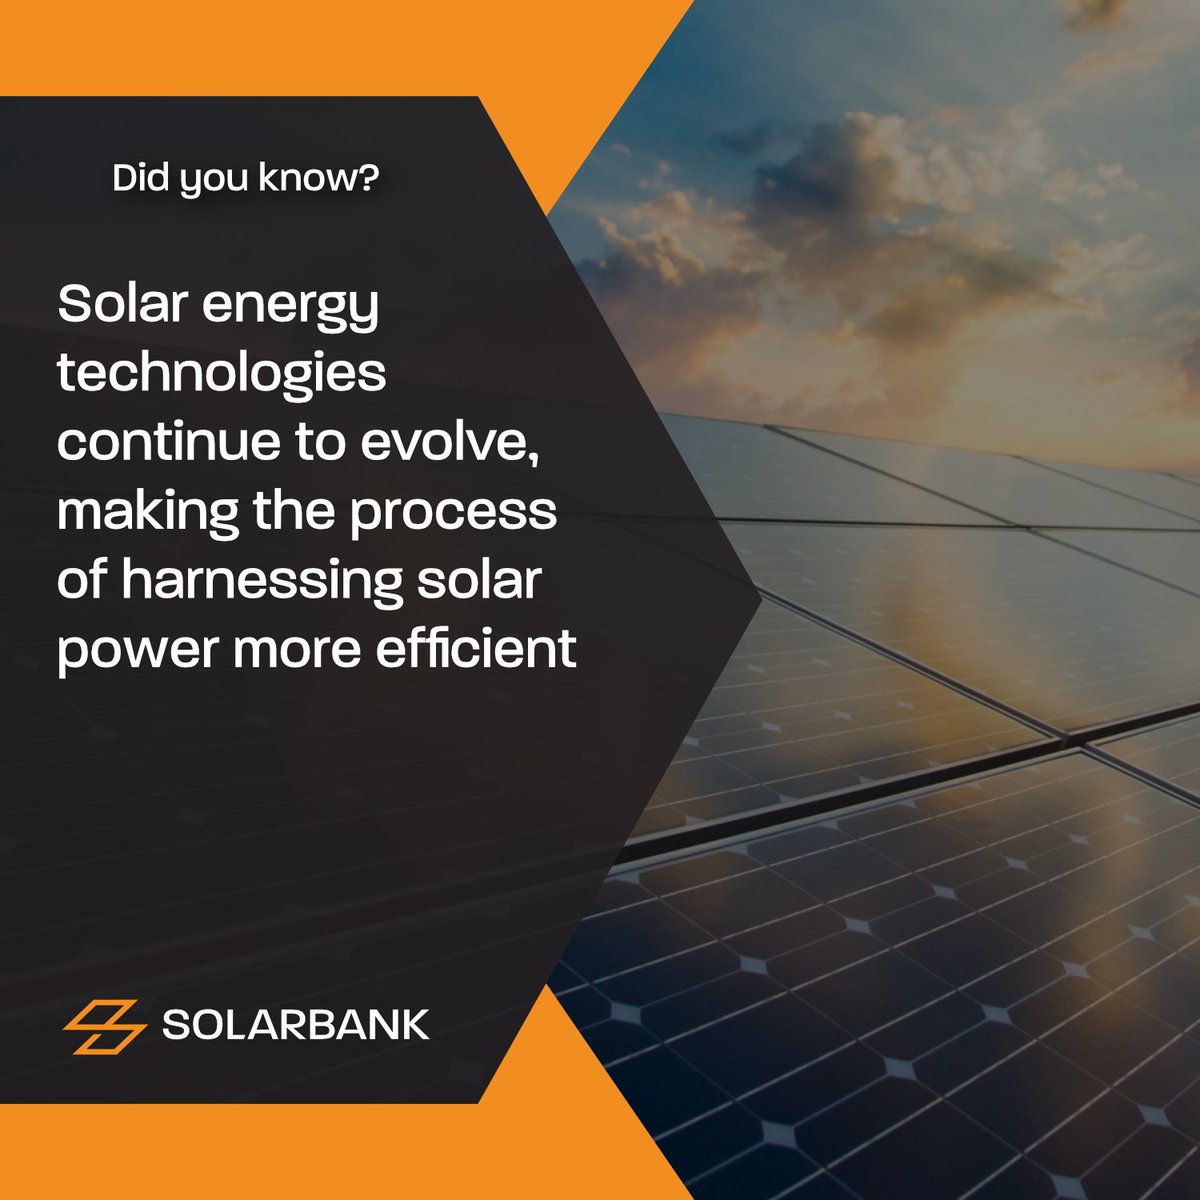 Solar energy technologies continue to evolve, making the process of harnessing solar power more efficient #EfficientEnergy #Evolution #SolarPower #DidYouKnow